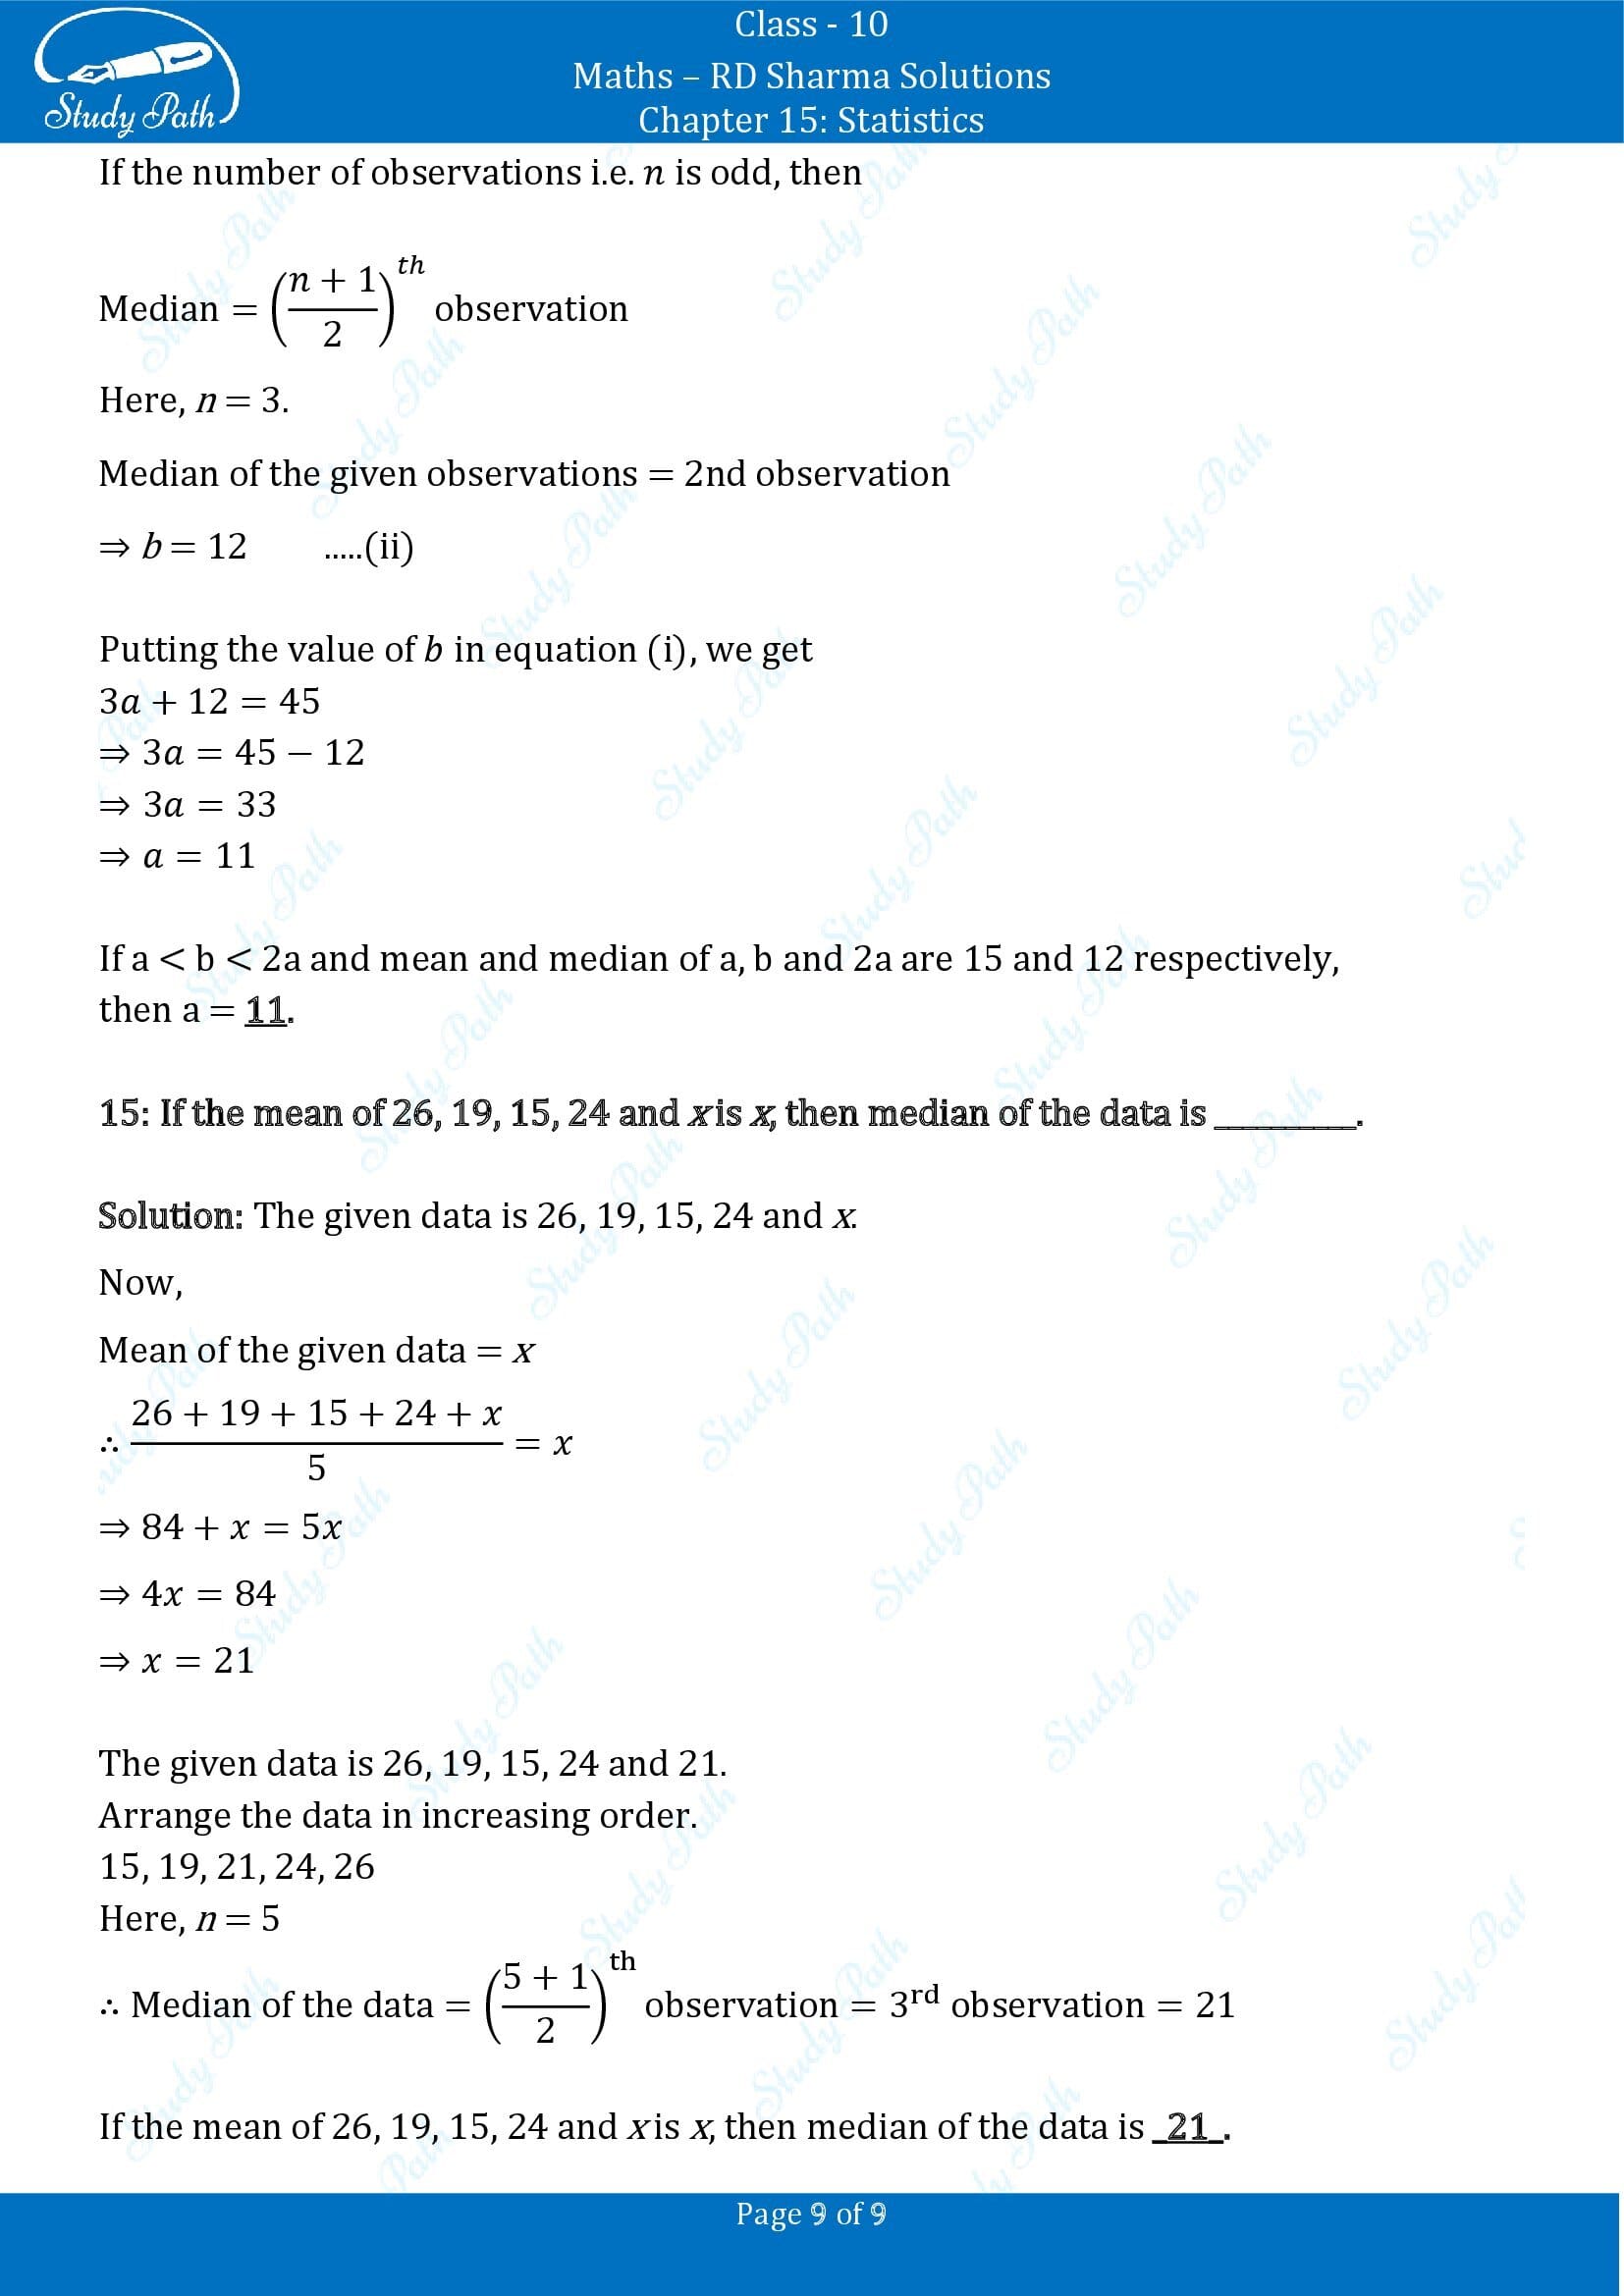 RD Sharma Solutions Class 10 Chapter 15 Statistics Fill in the Blank Type Questions FBQs 00009